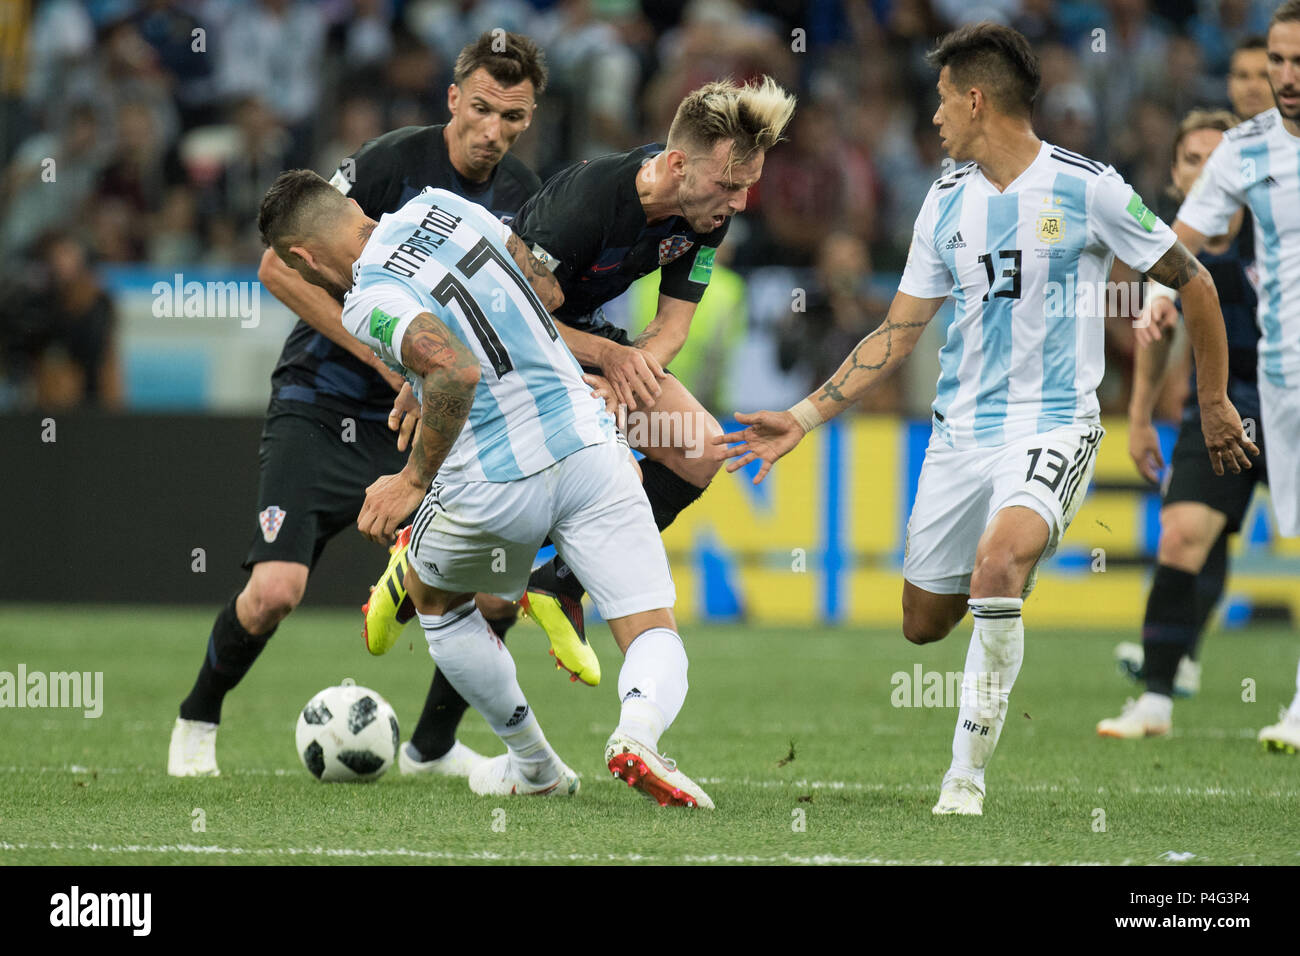 Nizhny Novgorod, Russia. 21 June 2018.  Ivan RAKITIC (mi., CRO) is overturned by Nicolas OTAMENDI (ARG), Action, duels, Argentina (ARG) - Croatia (CRO) 0: 3, Preliminary Round, Group D, Match 23, on 21.06.2018 in Moscow; Football World Cup 2018 in Russia from 14.06. - 15.07.2018. | usage worldwide Credit: dpa/Alamy Live News Credit: dpa picture alliance/Alamy Live News Stock Photo